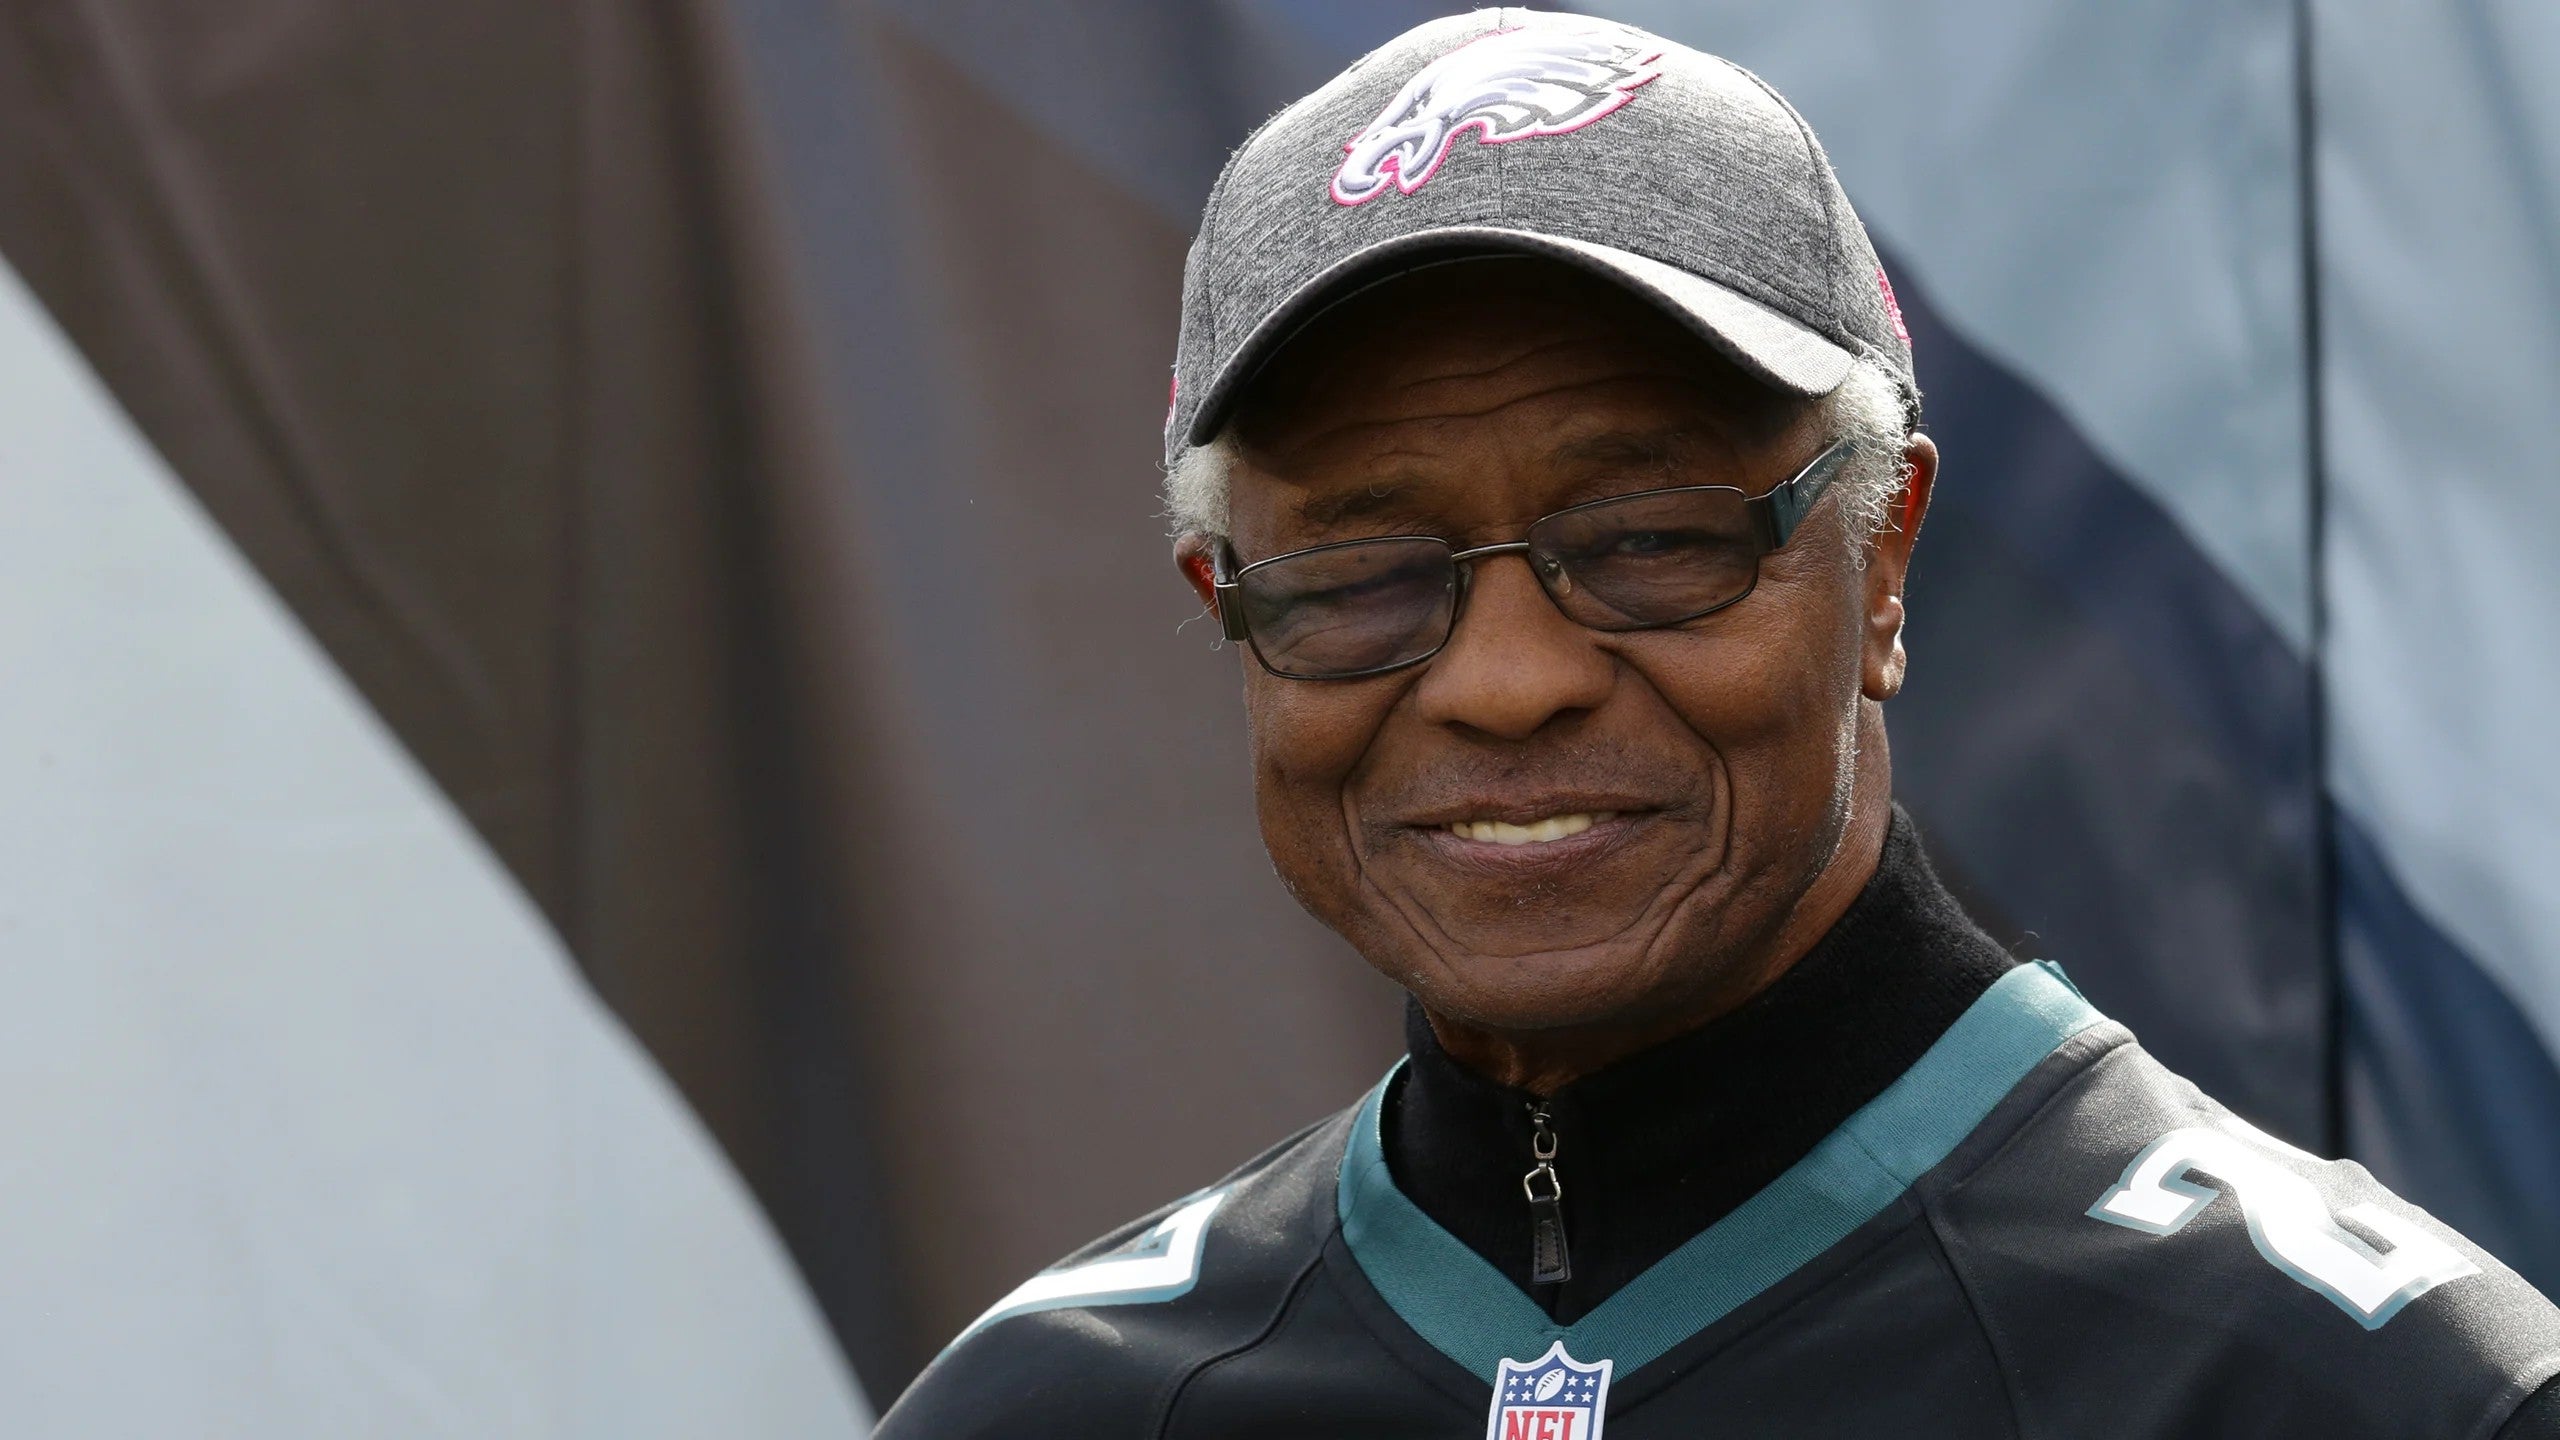 Irv Cross was a well-known American football player and commentator, who passed away on March 1st, 2021, at the age of 81.